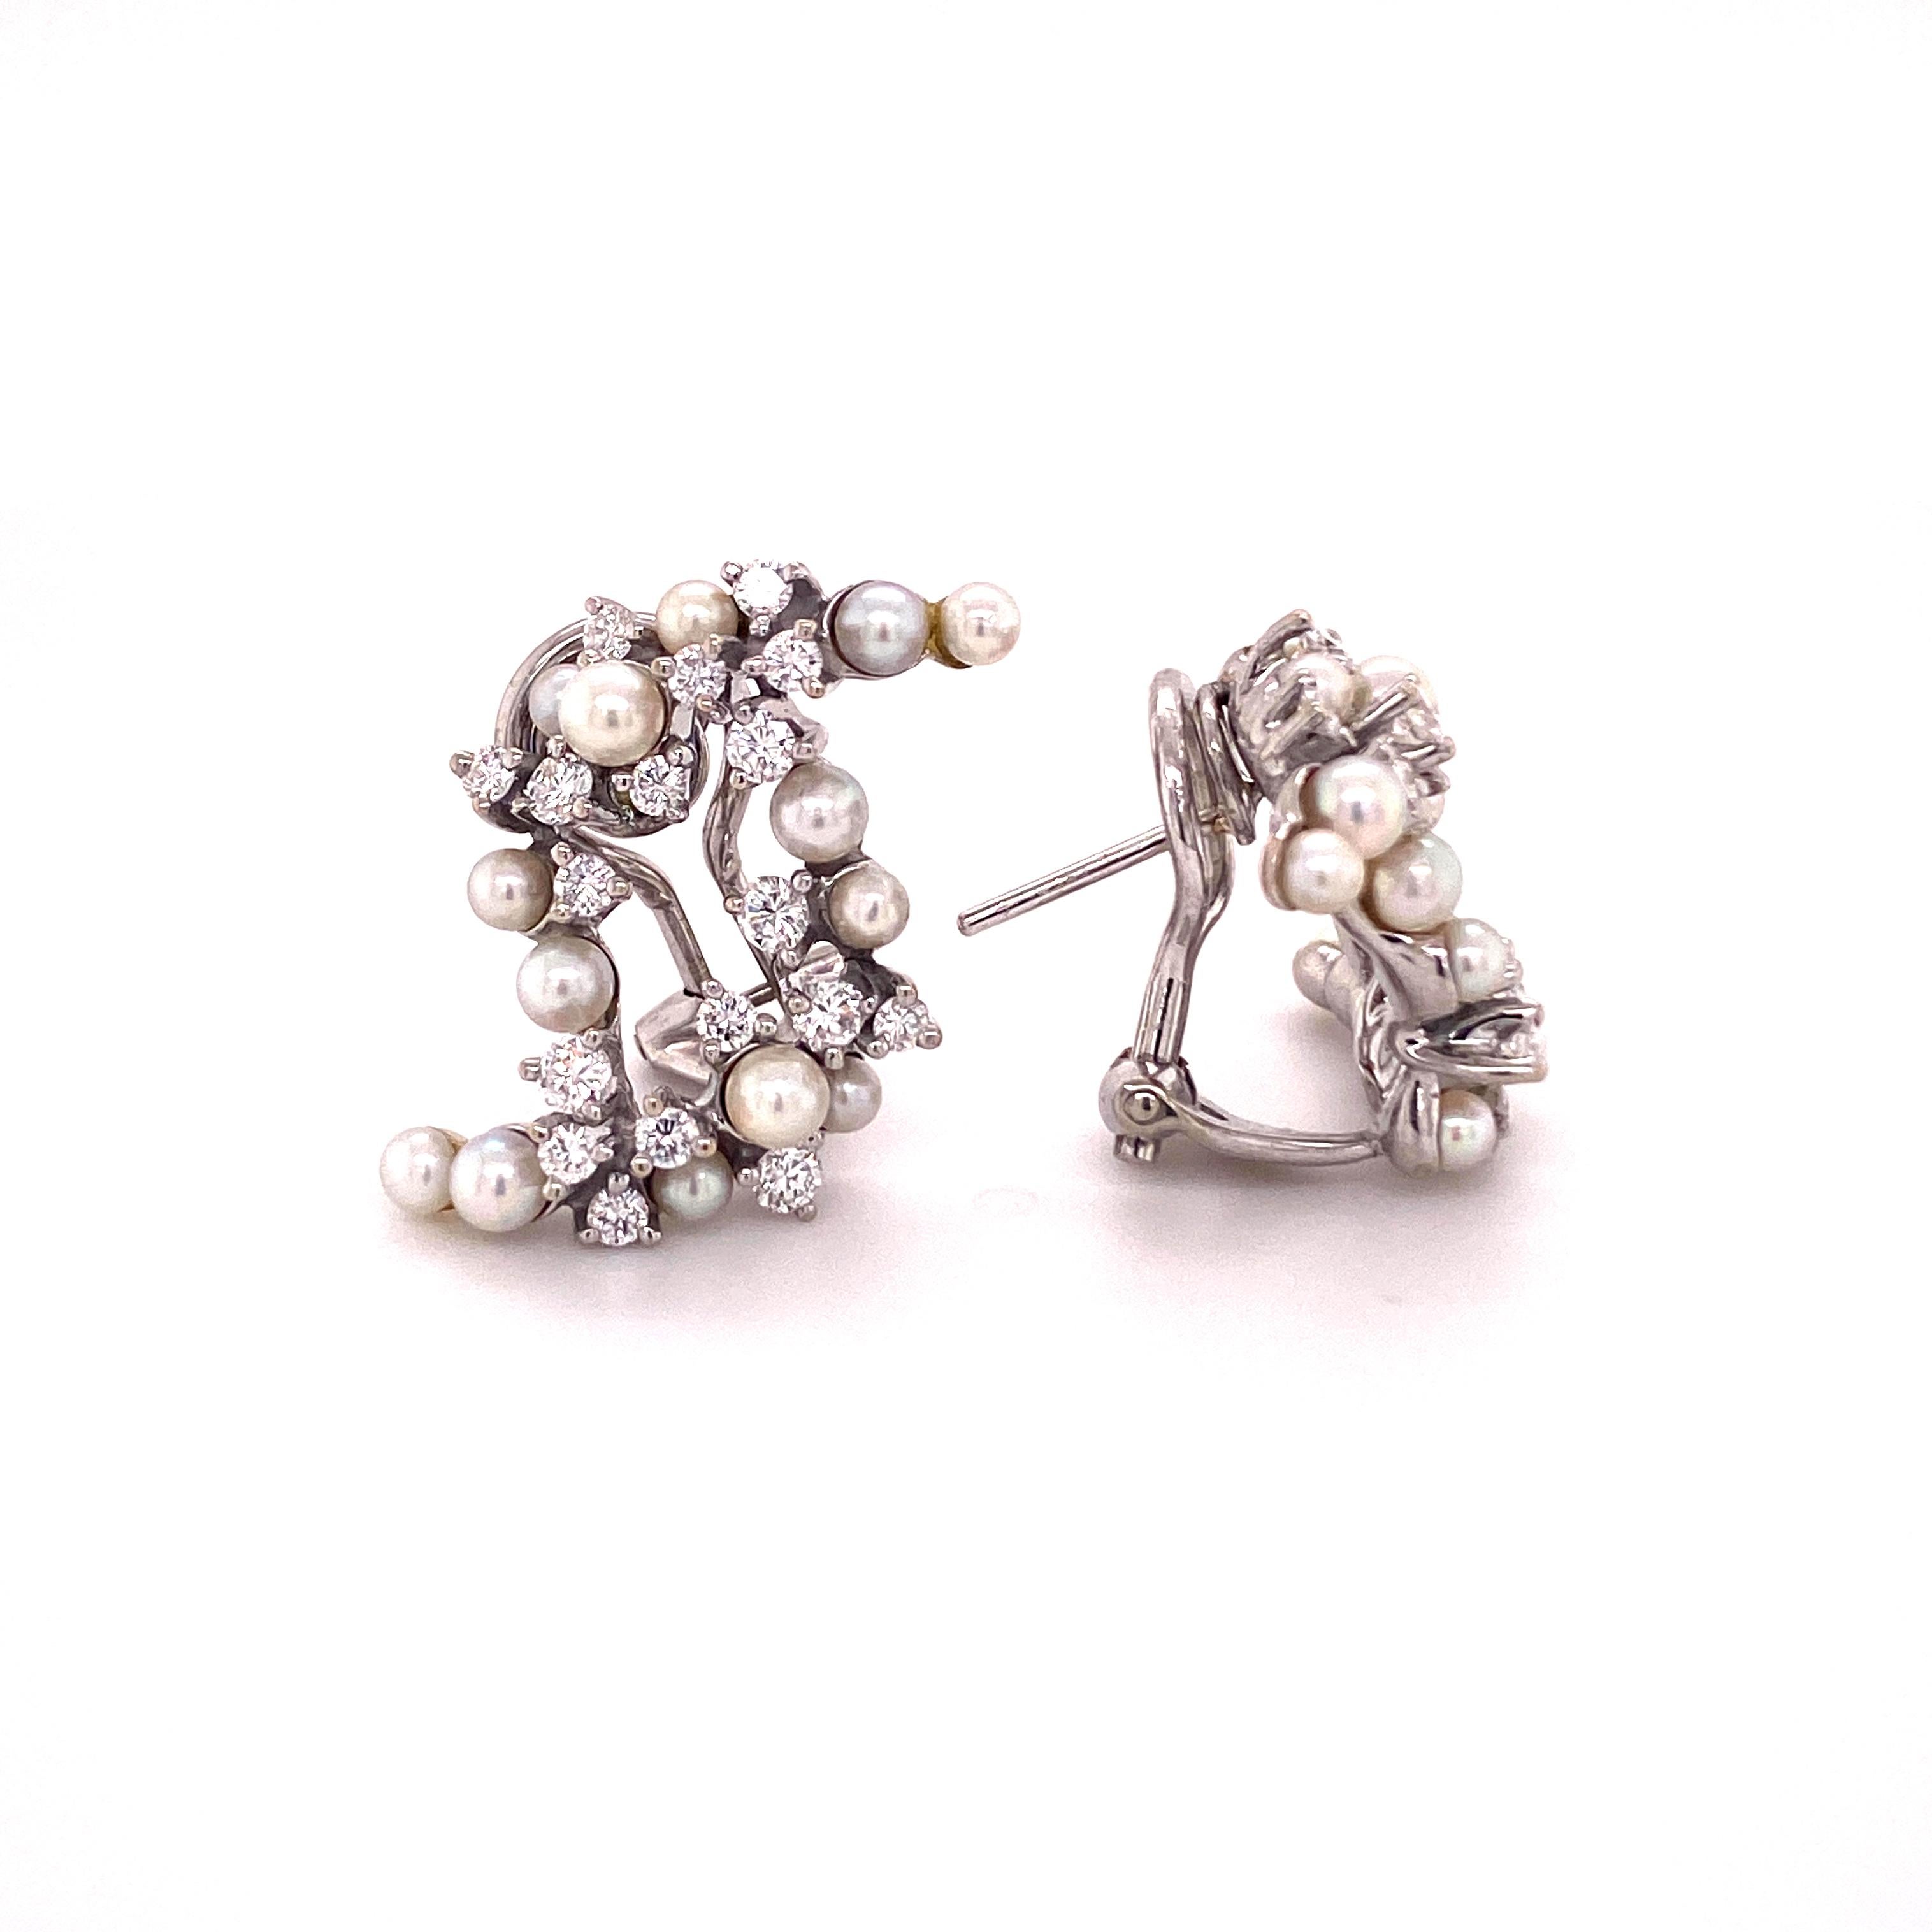 Contemporary Diamond and Cultured Pearl Earrings in White Gold 750